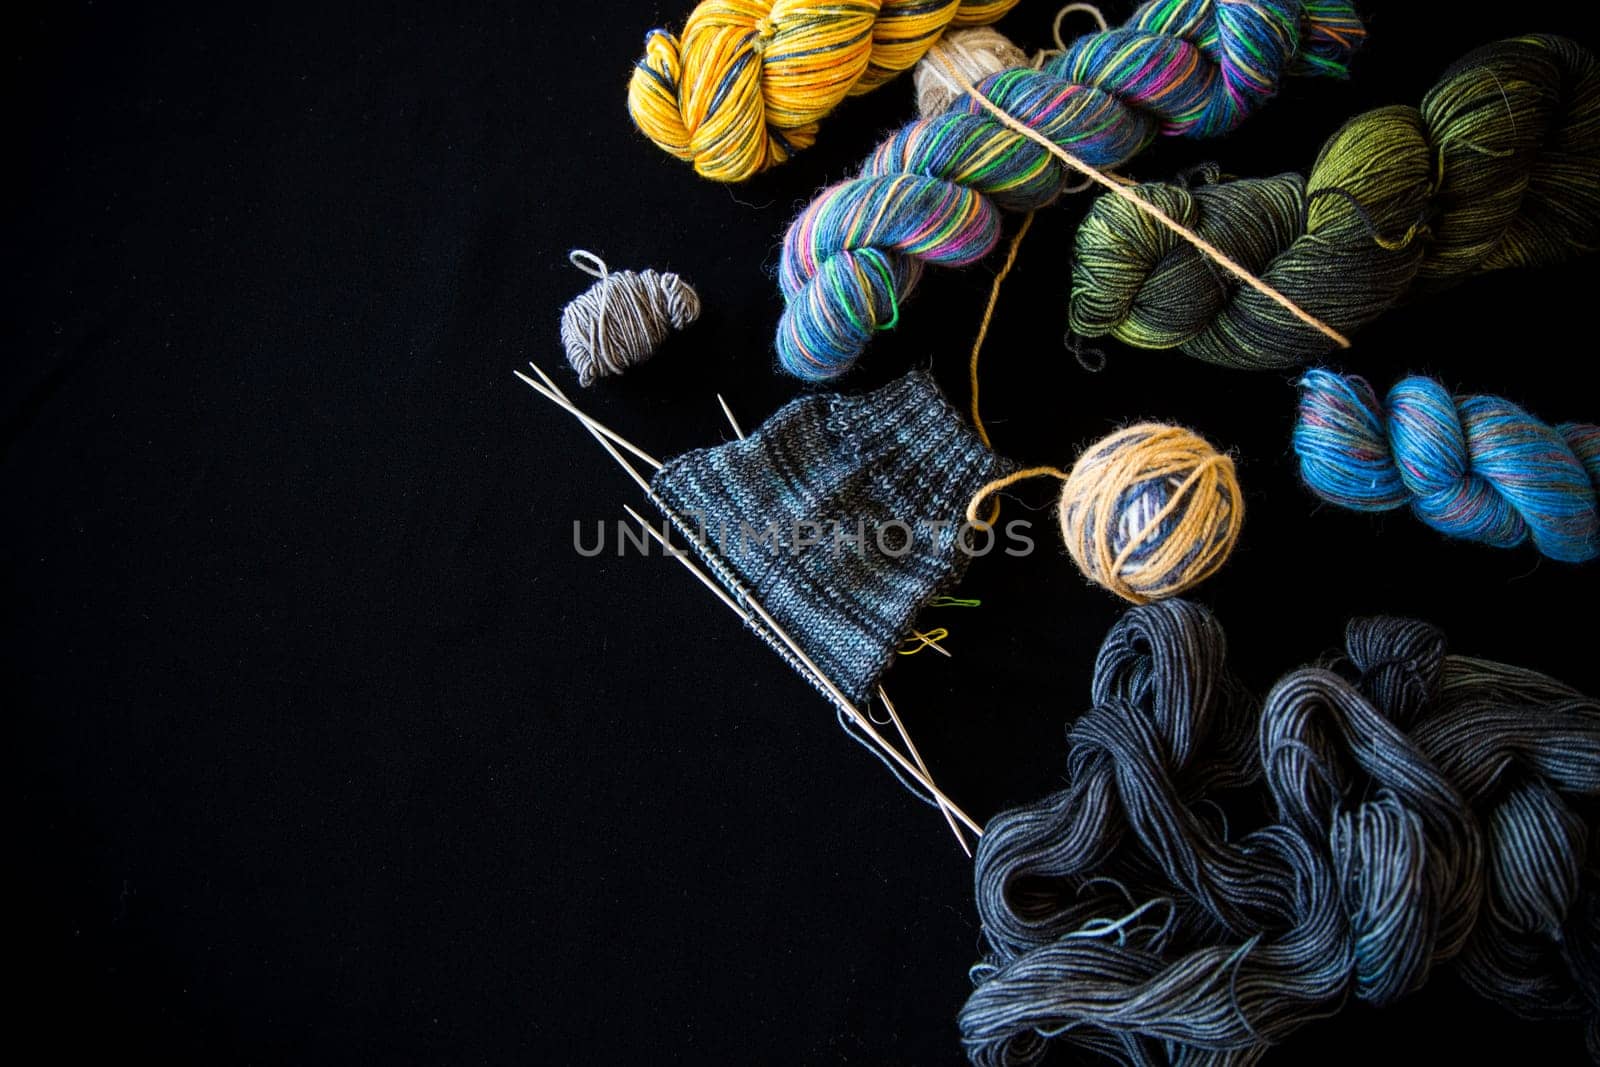 Colored threads, knitting needles and other items for hand knitting by Rawlik